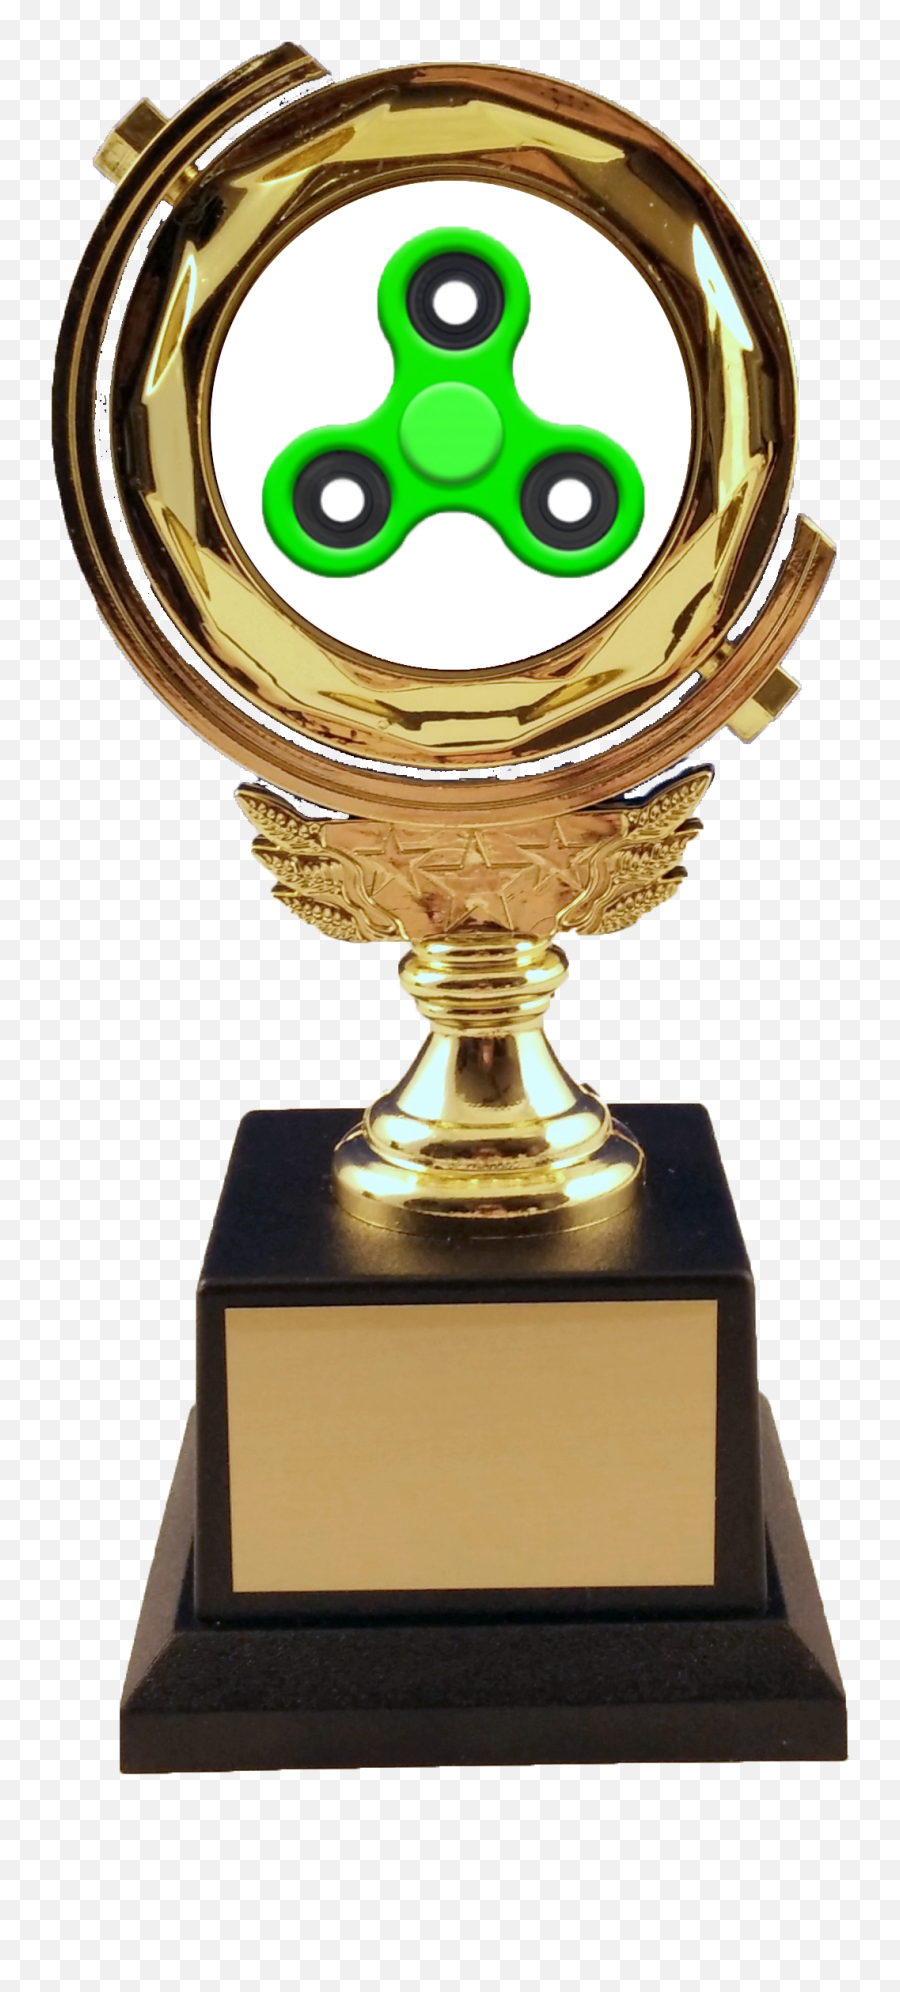 The Spinning Fidget Spinner Trophy - Solid Emoji,How To Find The Fidget Spinner Snap Chat Emoticon